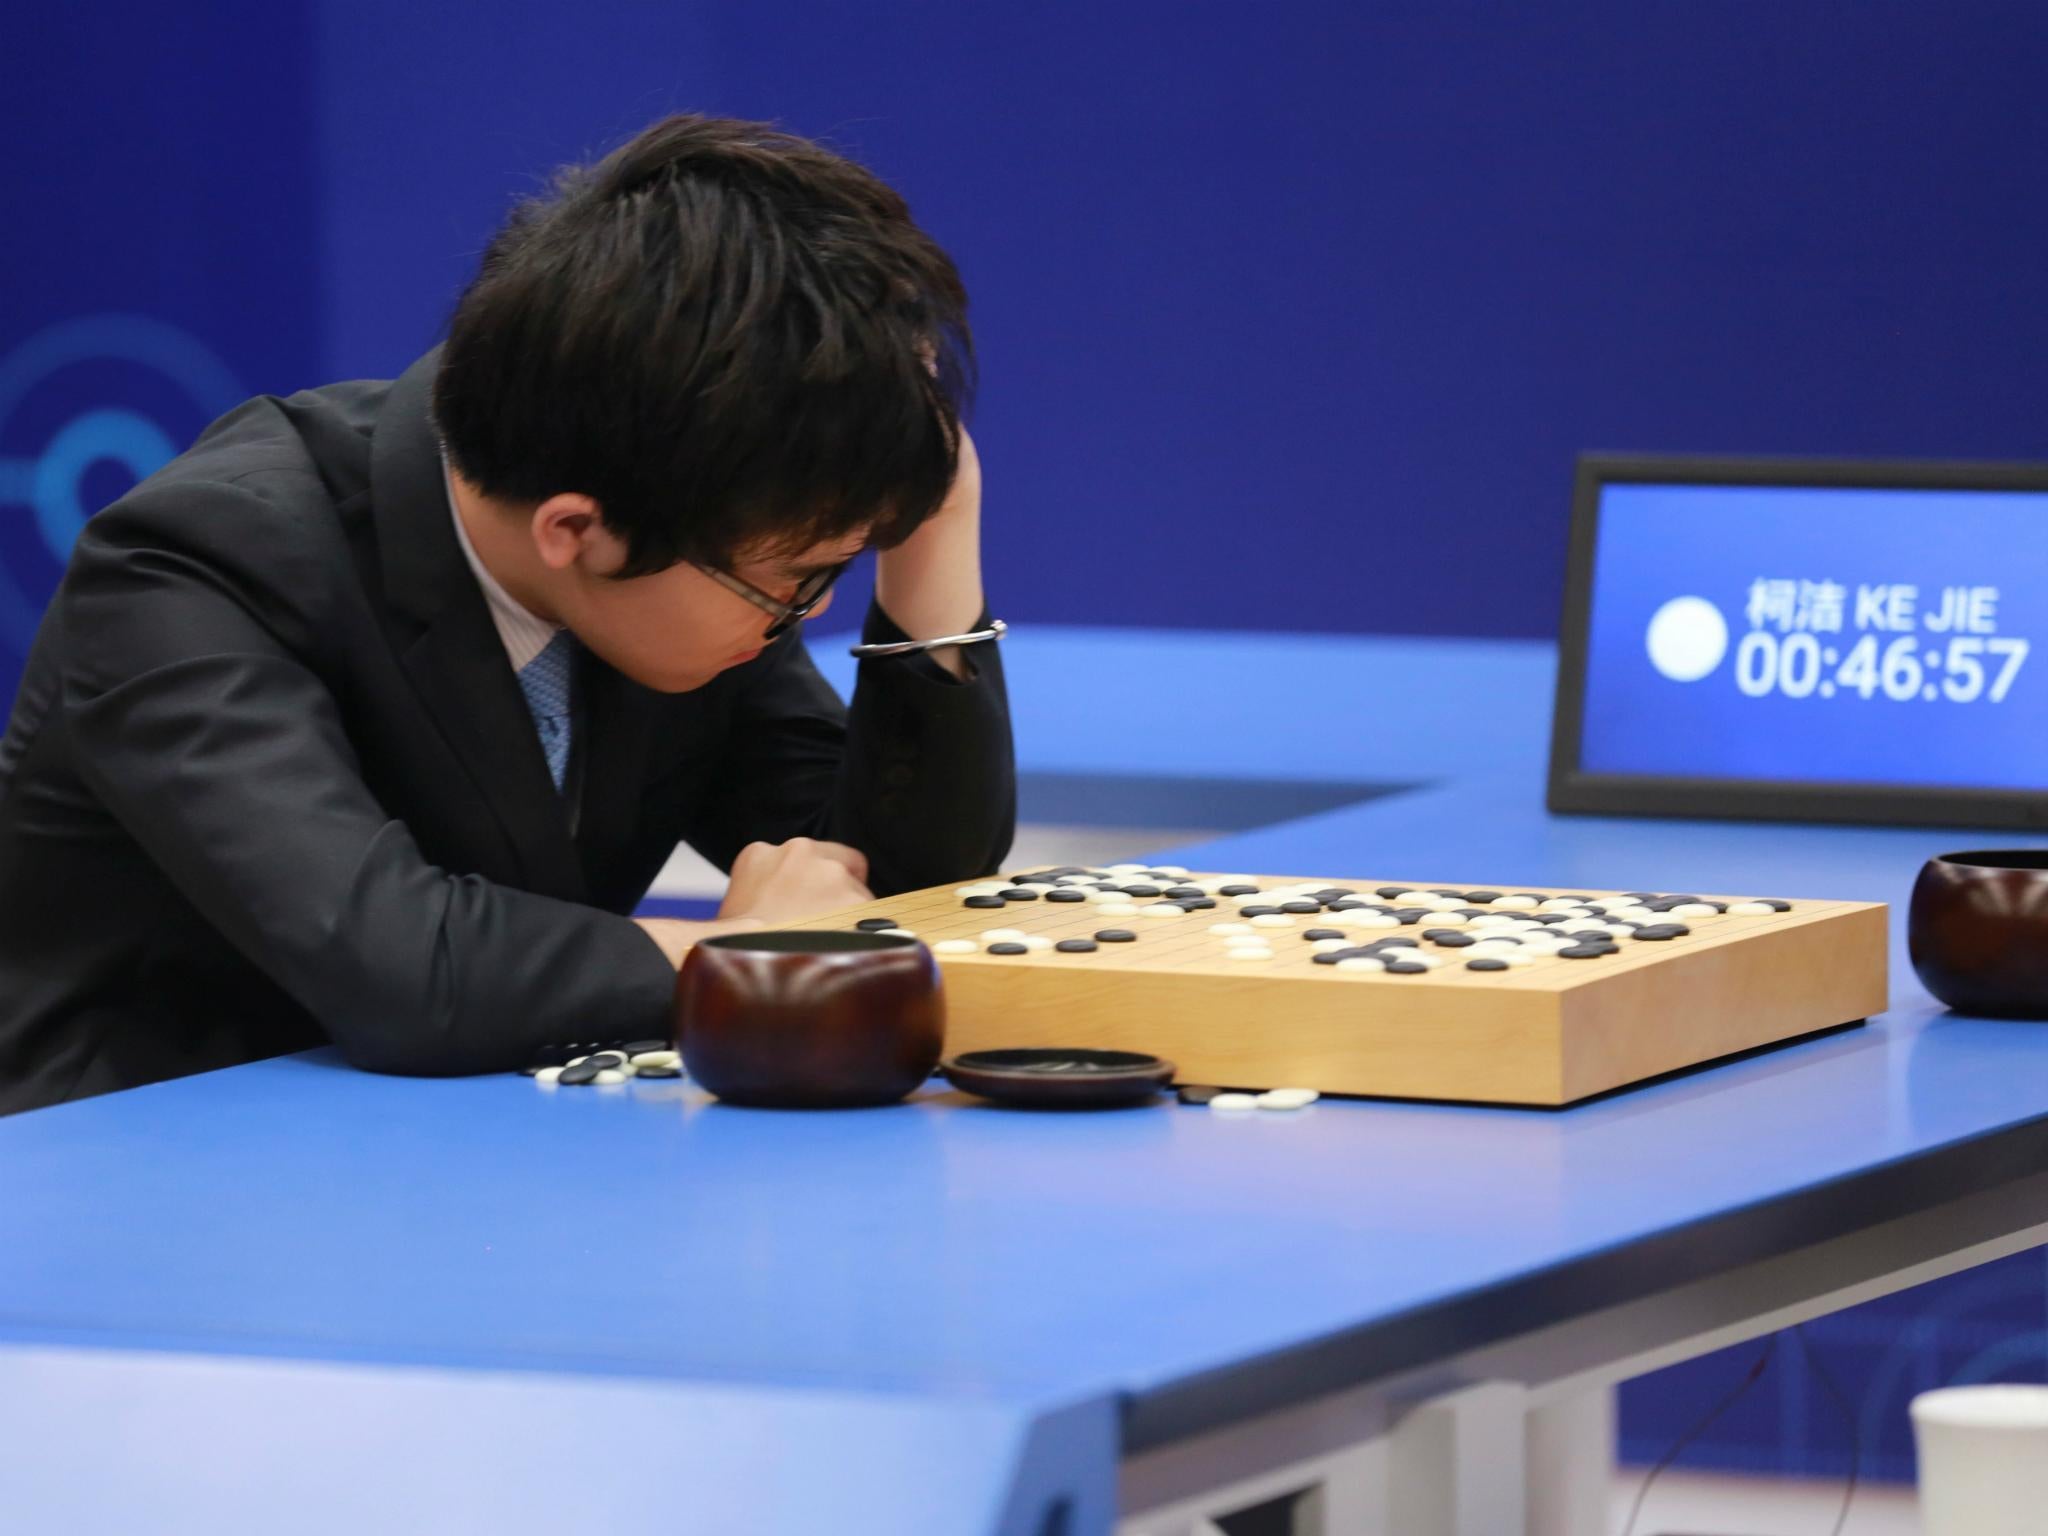 Chinese Go player Ke Jie reacts during his second match against Google's artificial intelligence program AlphaGo at the Future of Go Summit in Wuzhen, Zhejiang province, China May 25, 2017